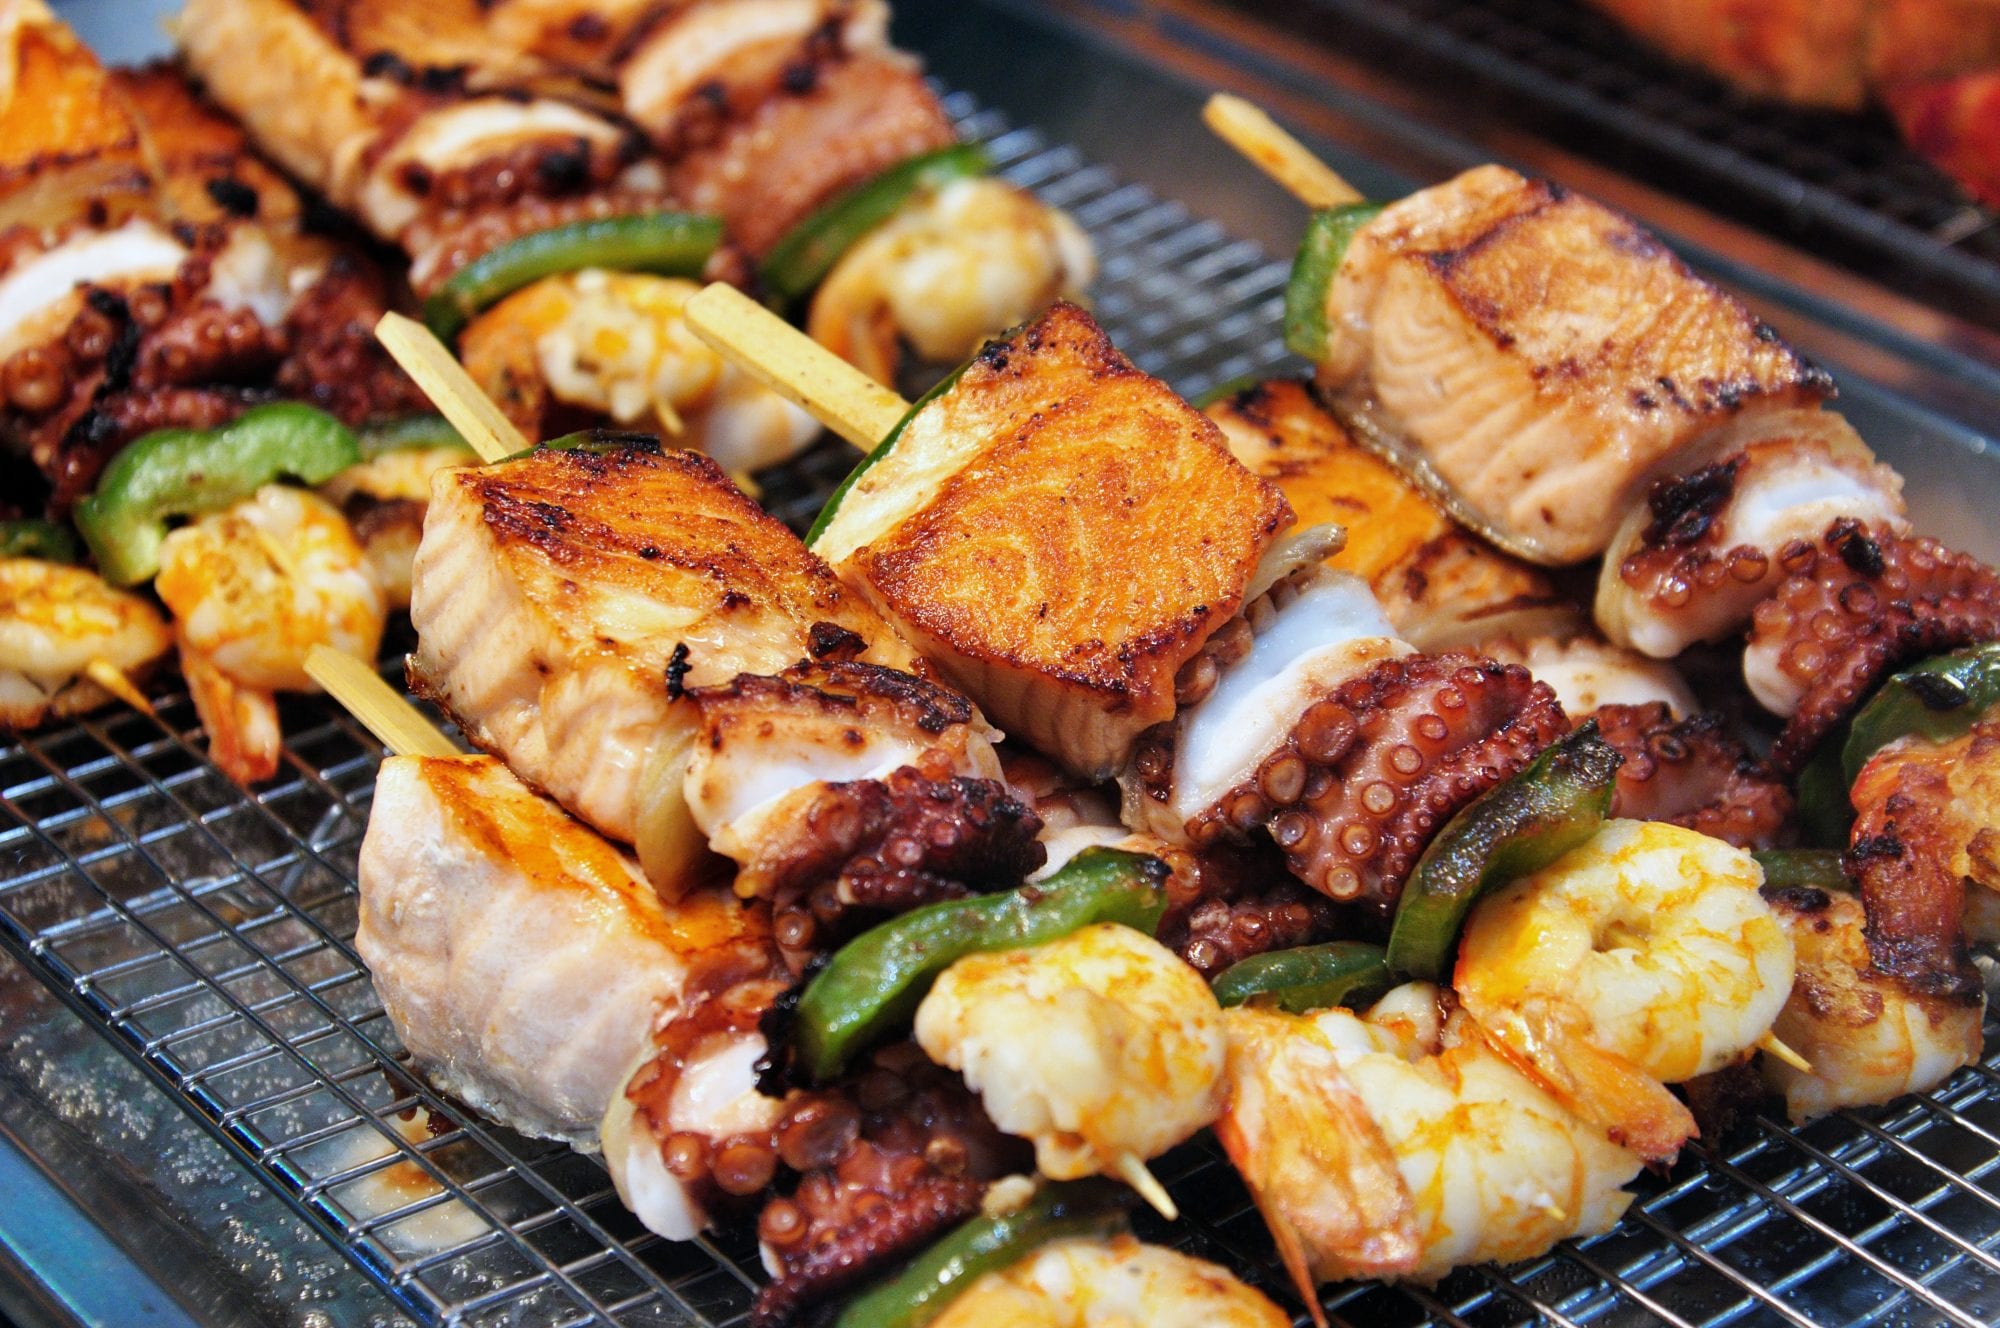 Grilled skewers of seafood consist of salmon, cuttlefish, scampi, and vegetables